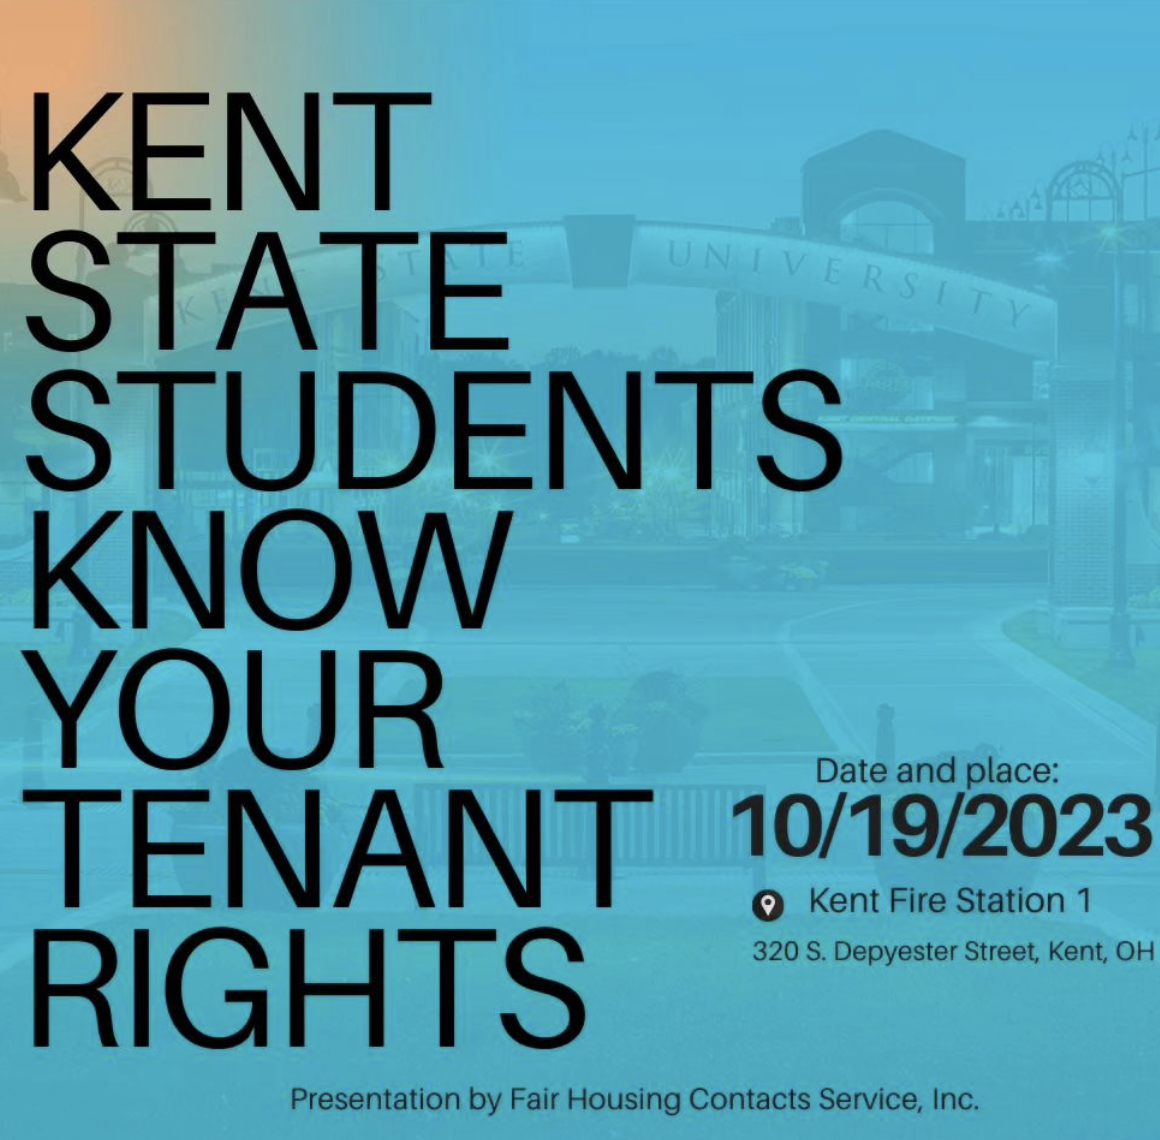 Fair House Contact Services Inc. informs students on Ohio Revised Code of tenant rights